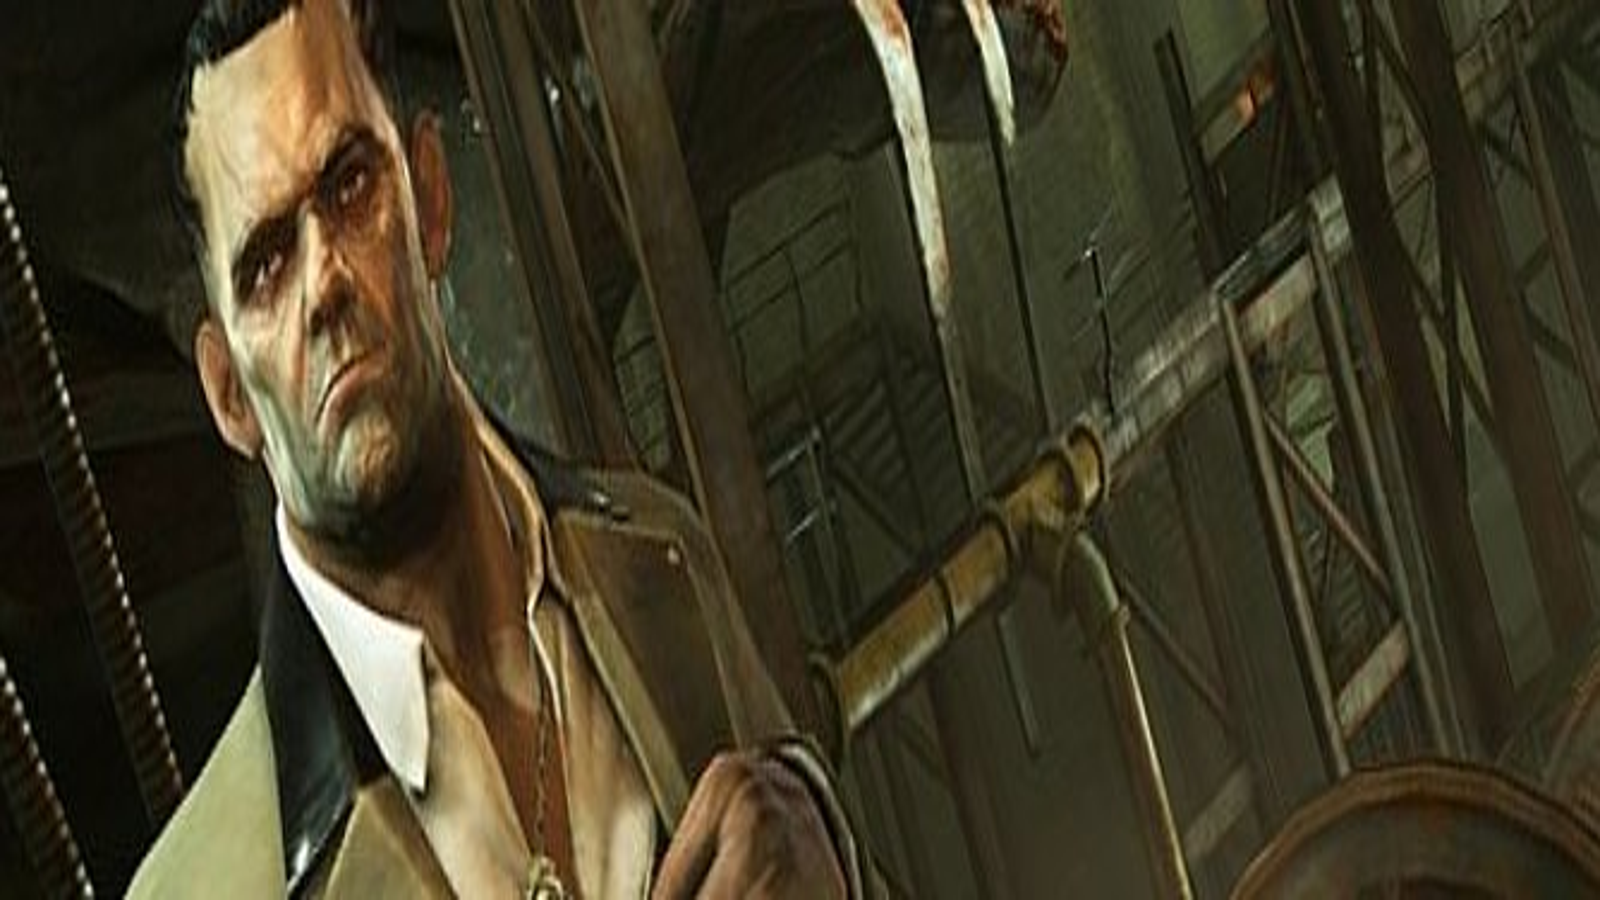 How long is Dishonored: The Knife of Dunwall?